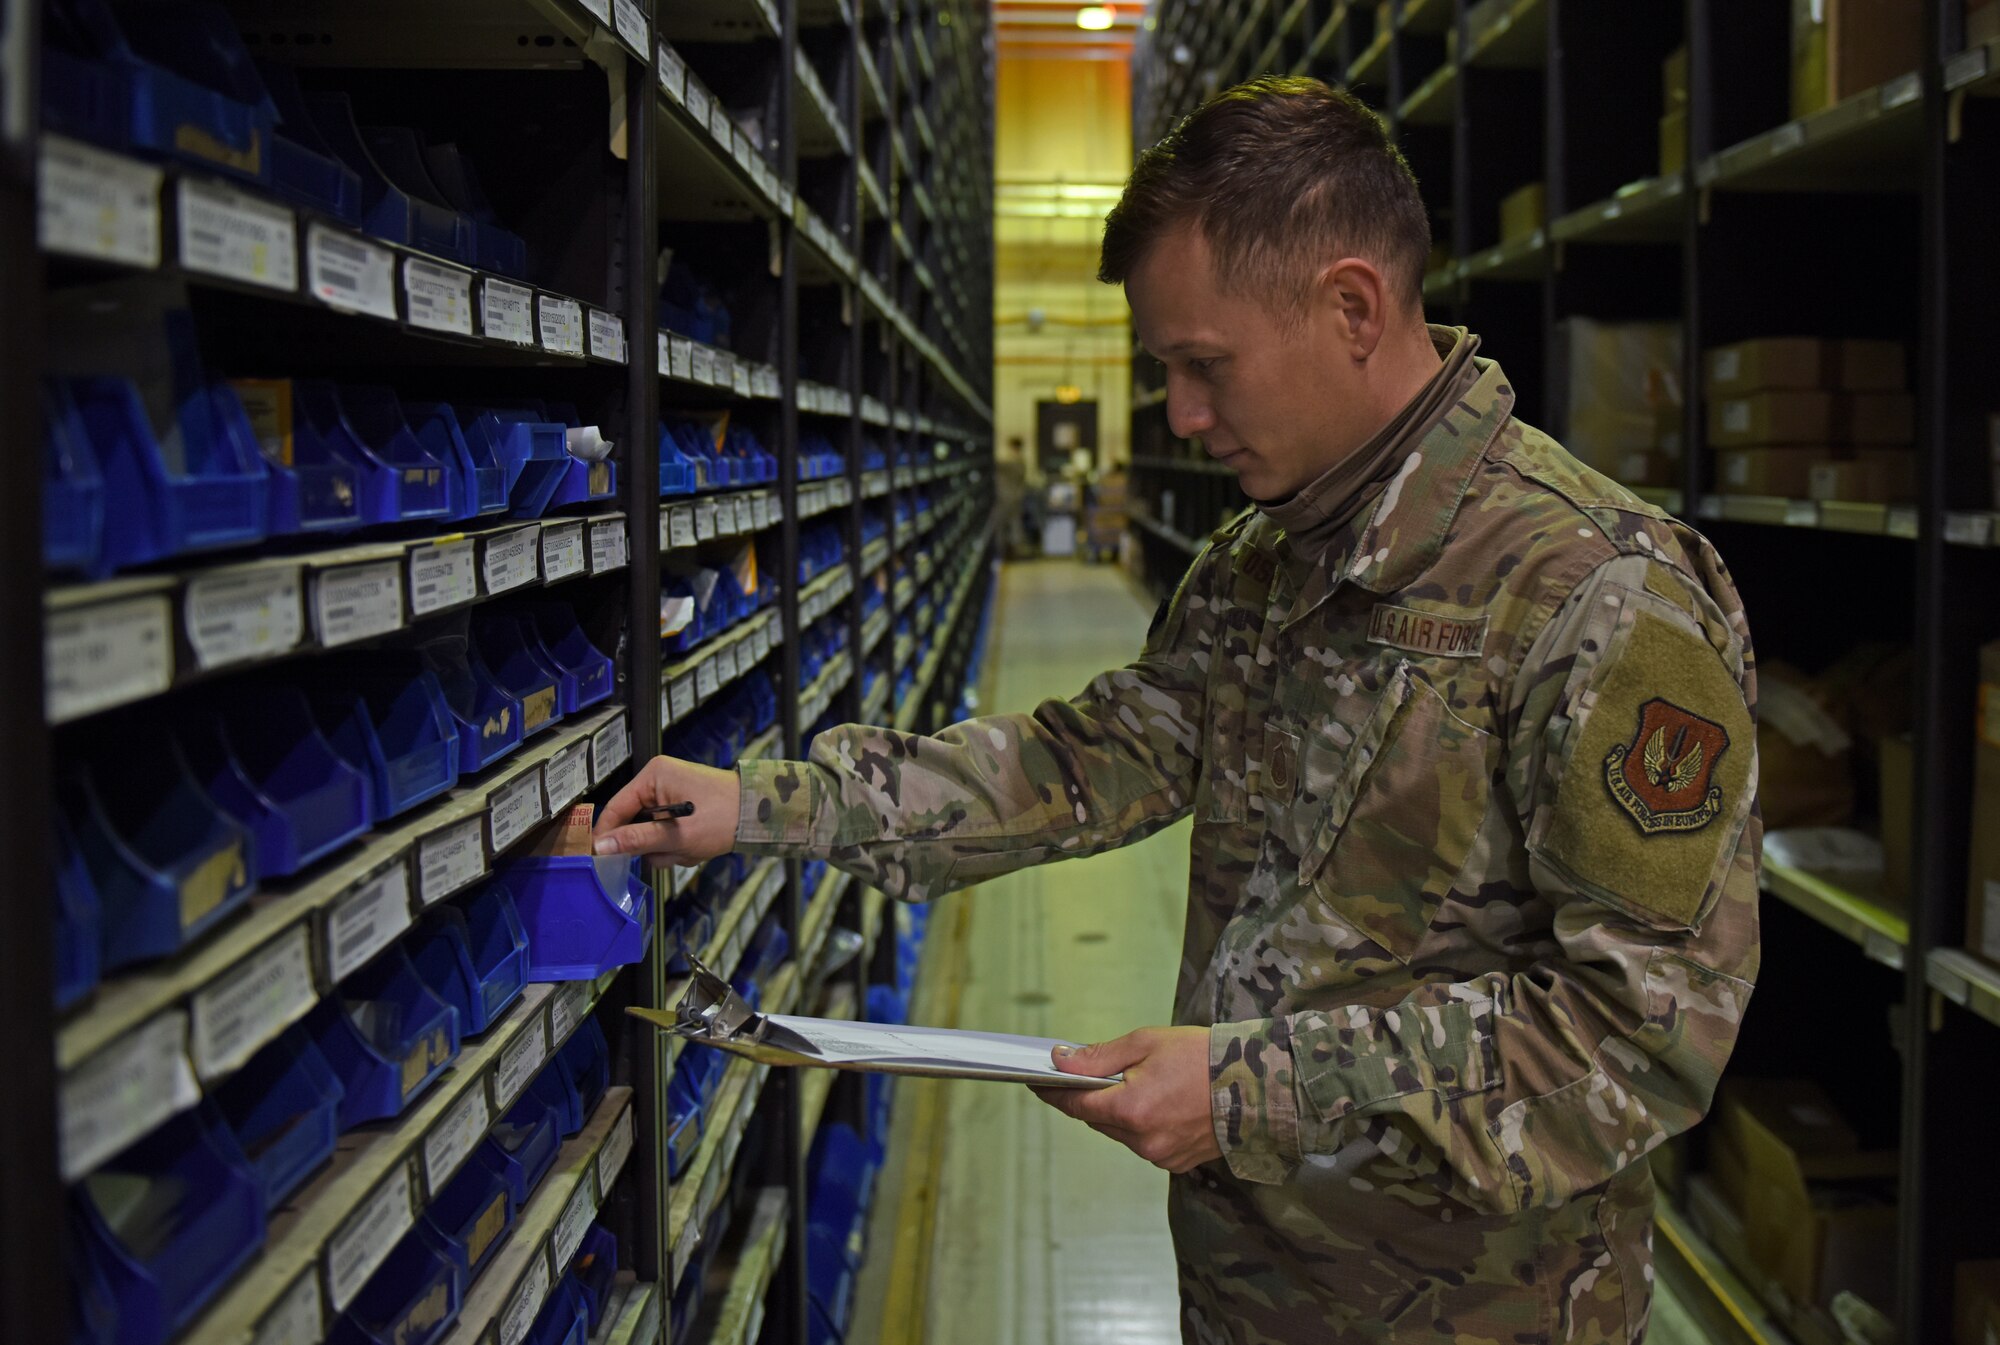 U.S. Air Force Master Sgt. Bruno Mosqueira, Logistics Readiness Squadron Materiel Management Flight storage and issue section chief, inspects inventory at Royal Air Force Lakenheath, England, Oct. 5, 2020. M-Flight manages three warehouses that collectively houses 1.3 million assets including aircraft parts and training and deployment gear. (U.S. Air Force photo by Airman 1st Class Rhonda Smith)